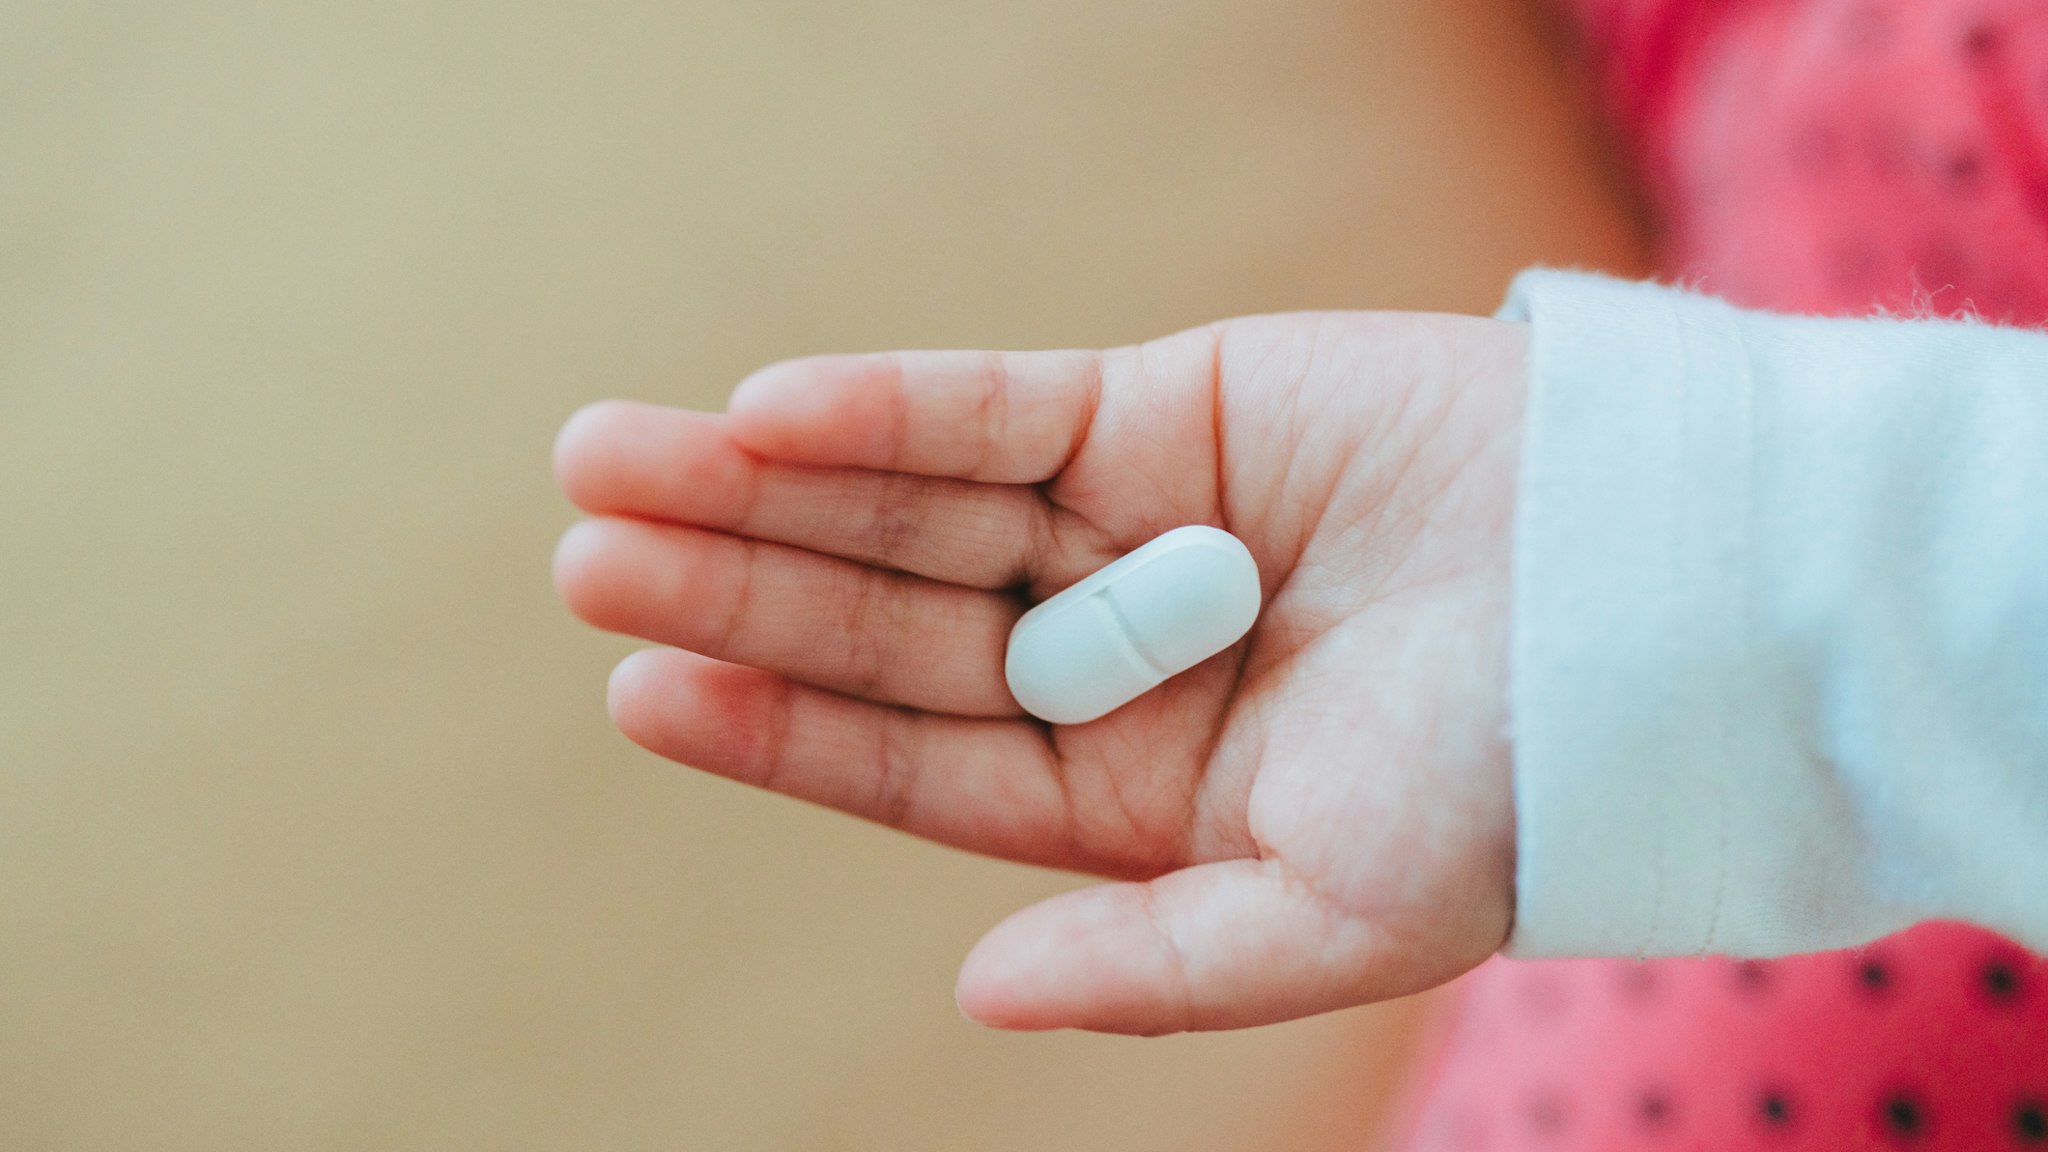 medical tablet pill on hand of a baby